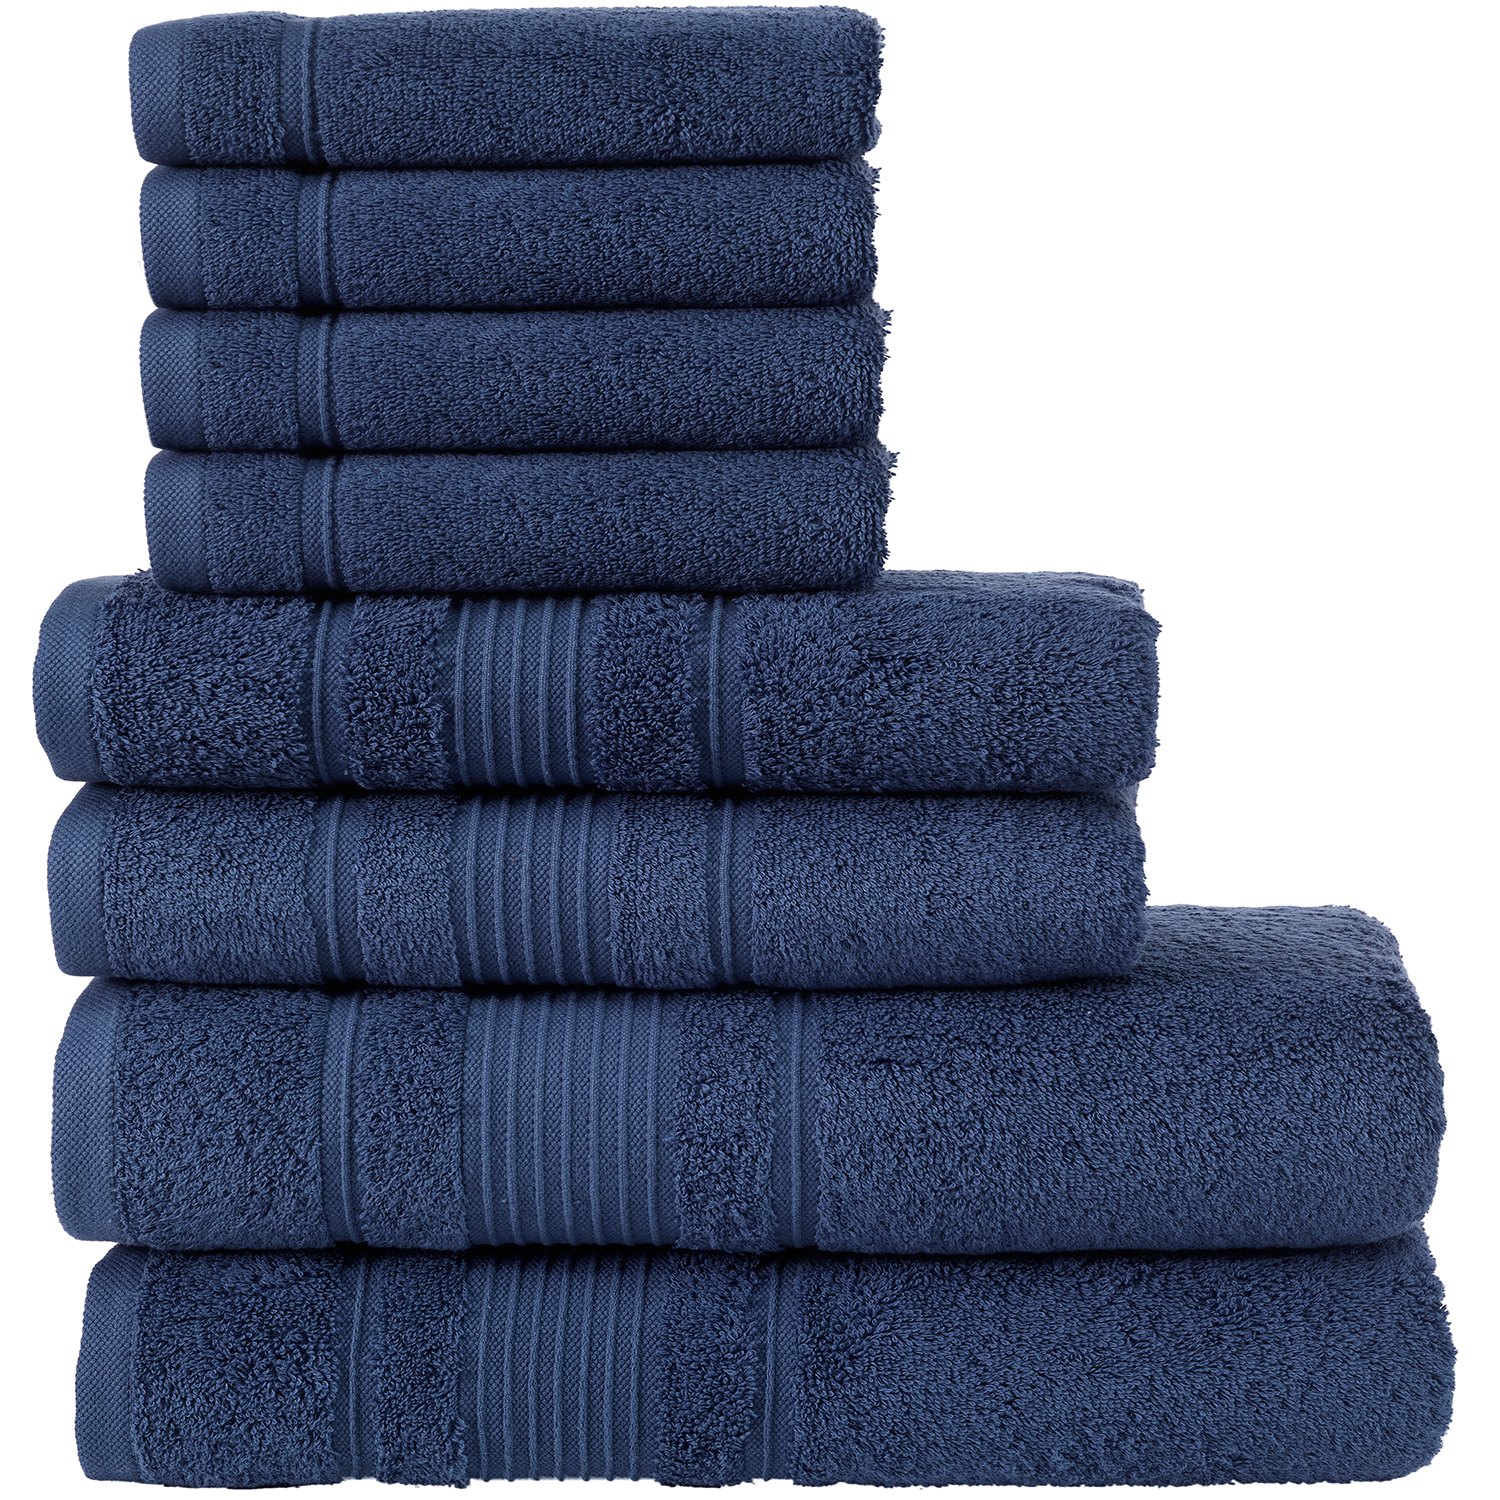 Qute Home Spa & Hotel Towels 8 Piece Towel Set, 2 Bath Towels, 2 Hand Towels, and 4 Washcloths - Navy Blue - image 1 of 3